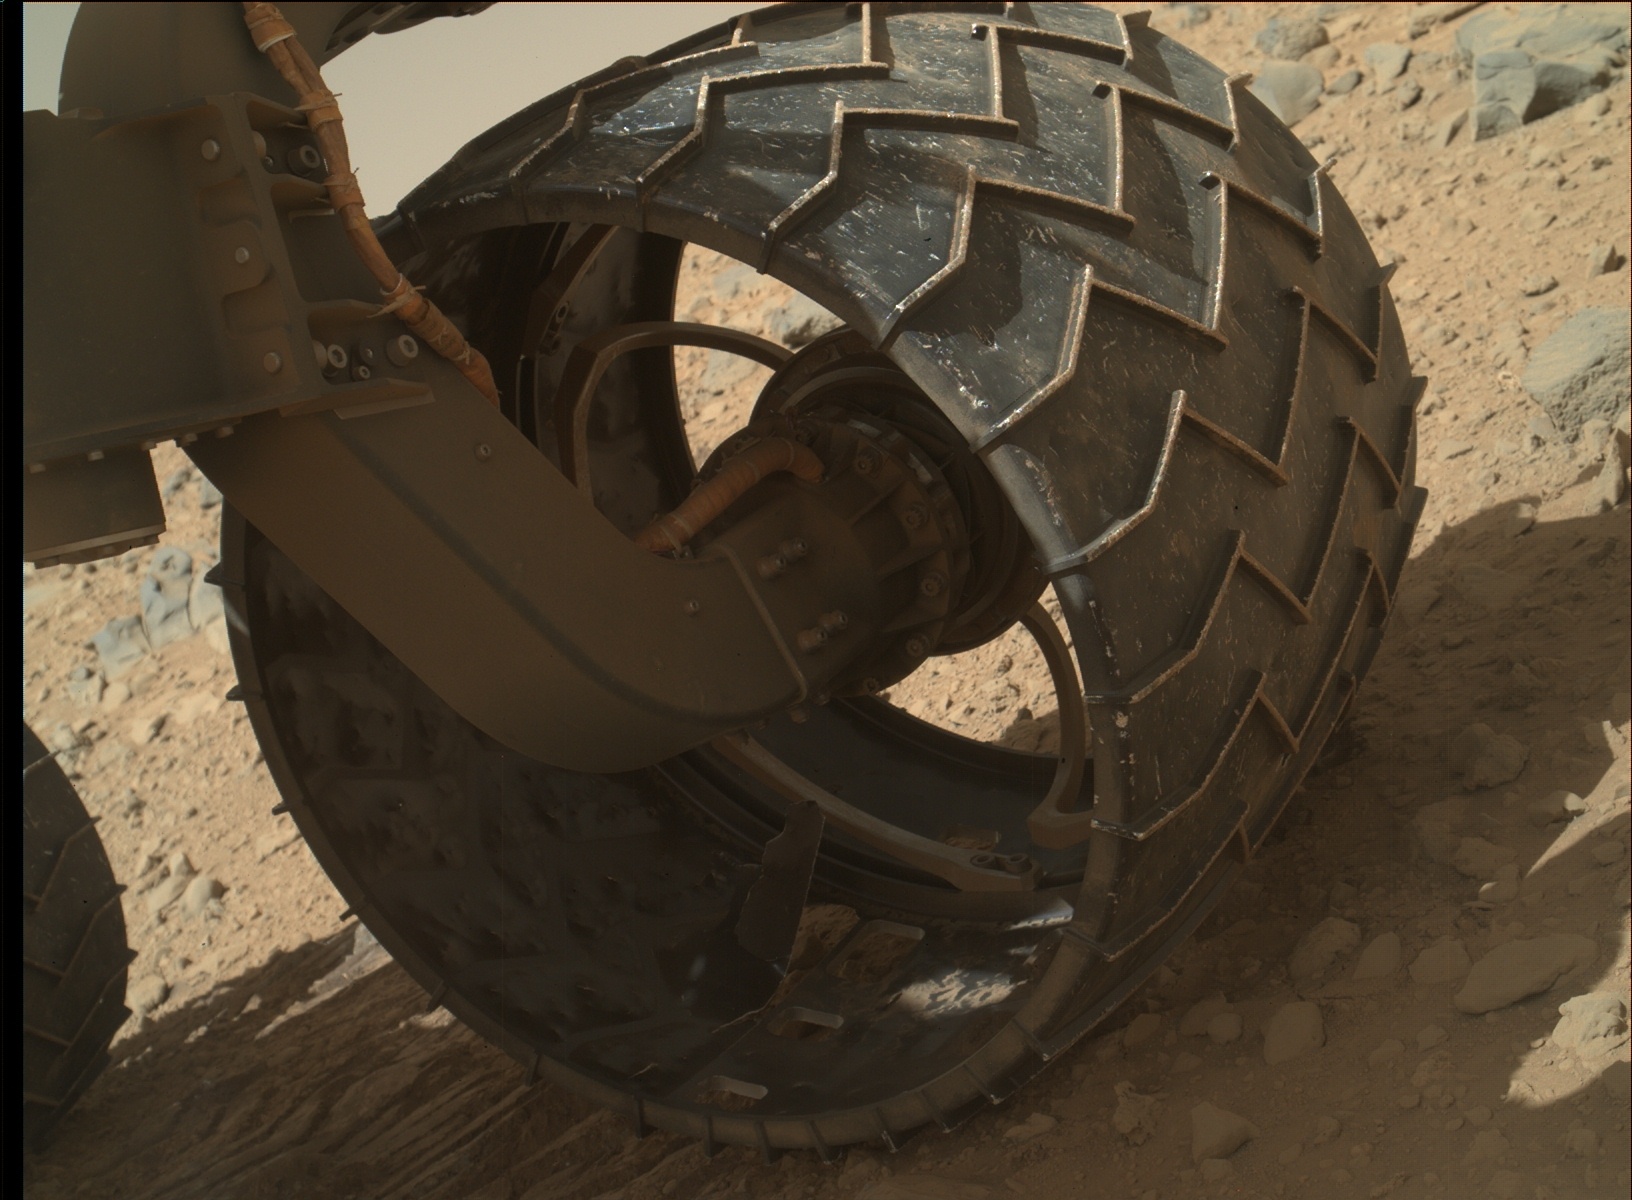 Nasa's Mars rover Curiosity acquired this image using its Mars Hand Lens Imager (MAHLI) on Sol 520